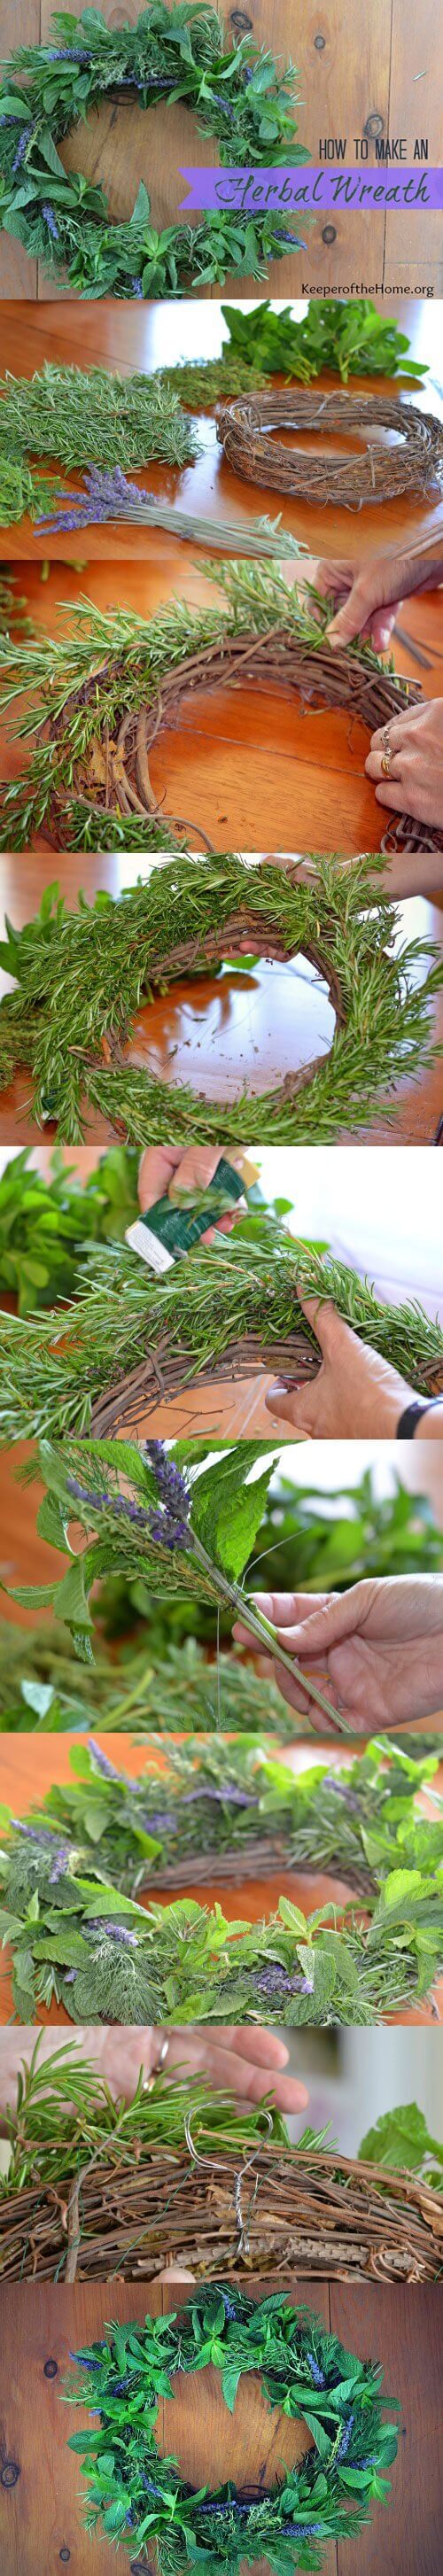 An herbal wreath is such a nice way to bring nature-inspired decor into your home and, if you have an herb garden, it could be an extremely frugal craft project. Here's all the instructions to make your own to brighten up your home with this lovely smelling wreath!